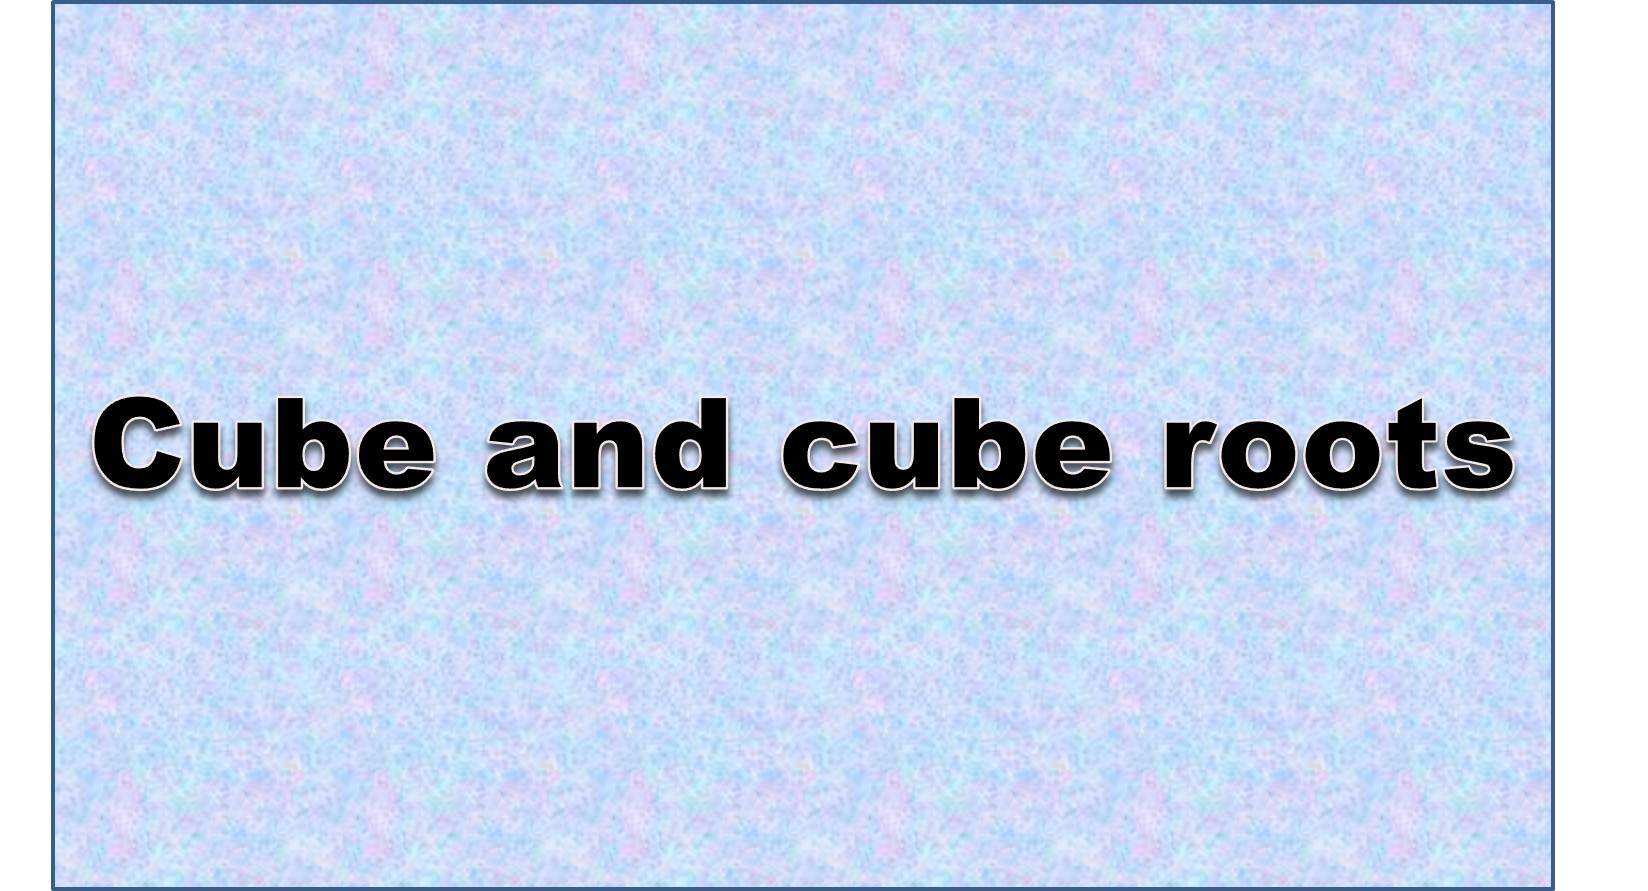 http://study.aisectonline.com/images/Worked example-cube root of a negative number.jpg